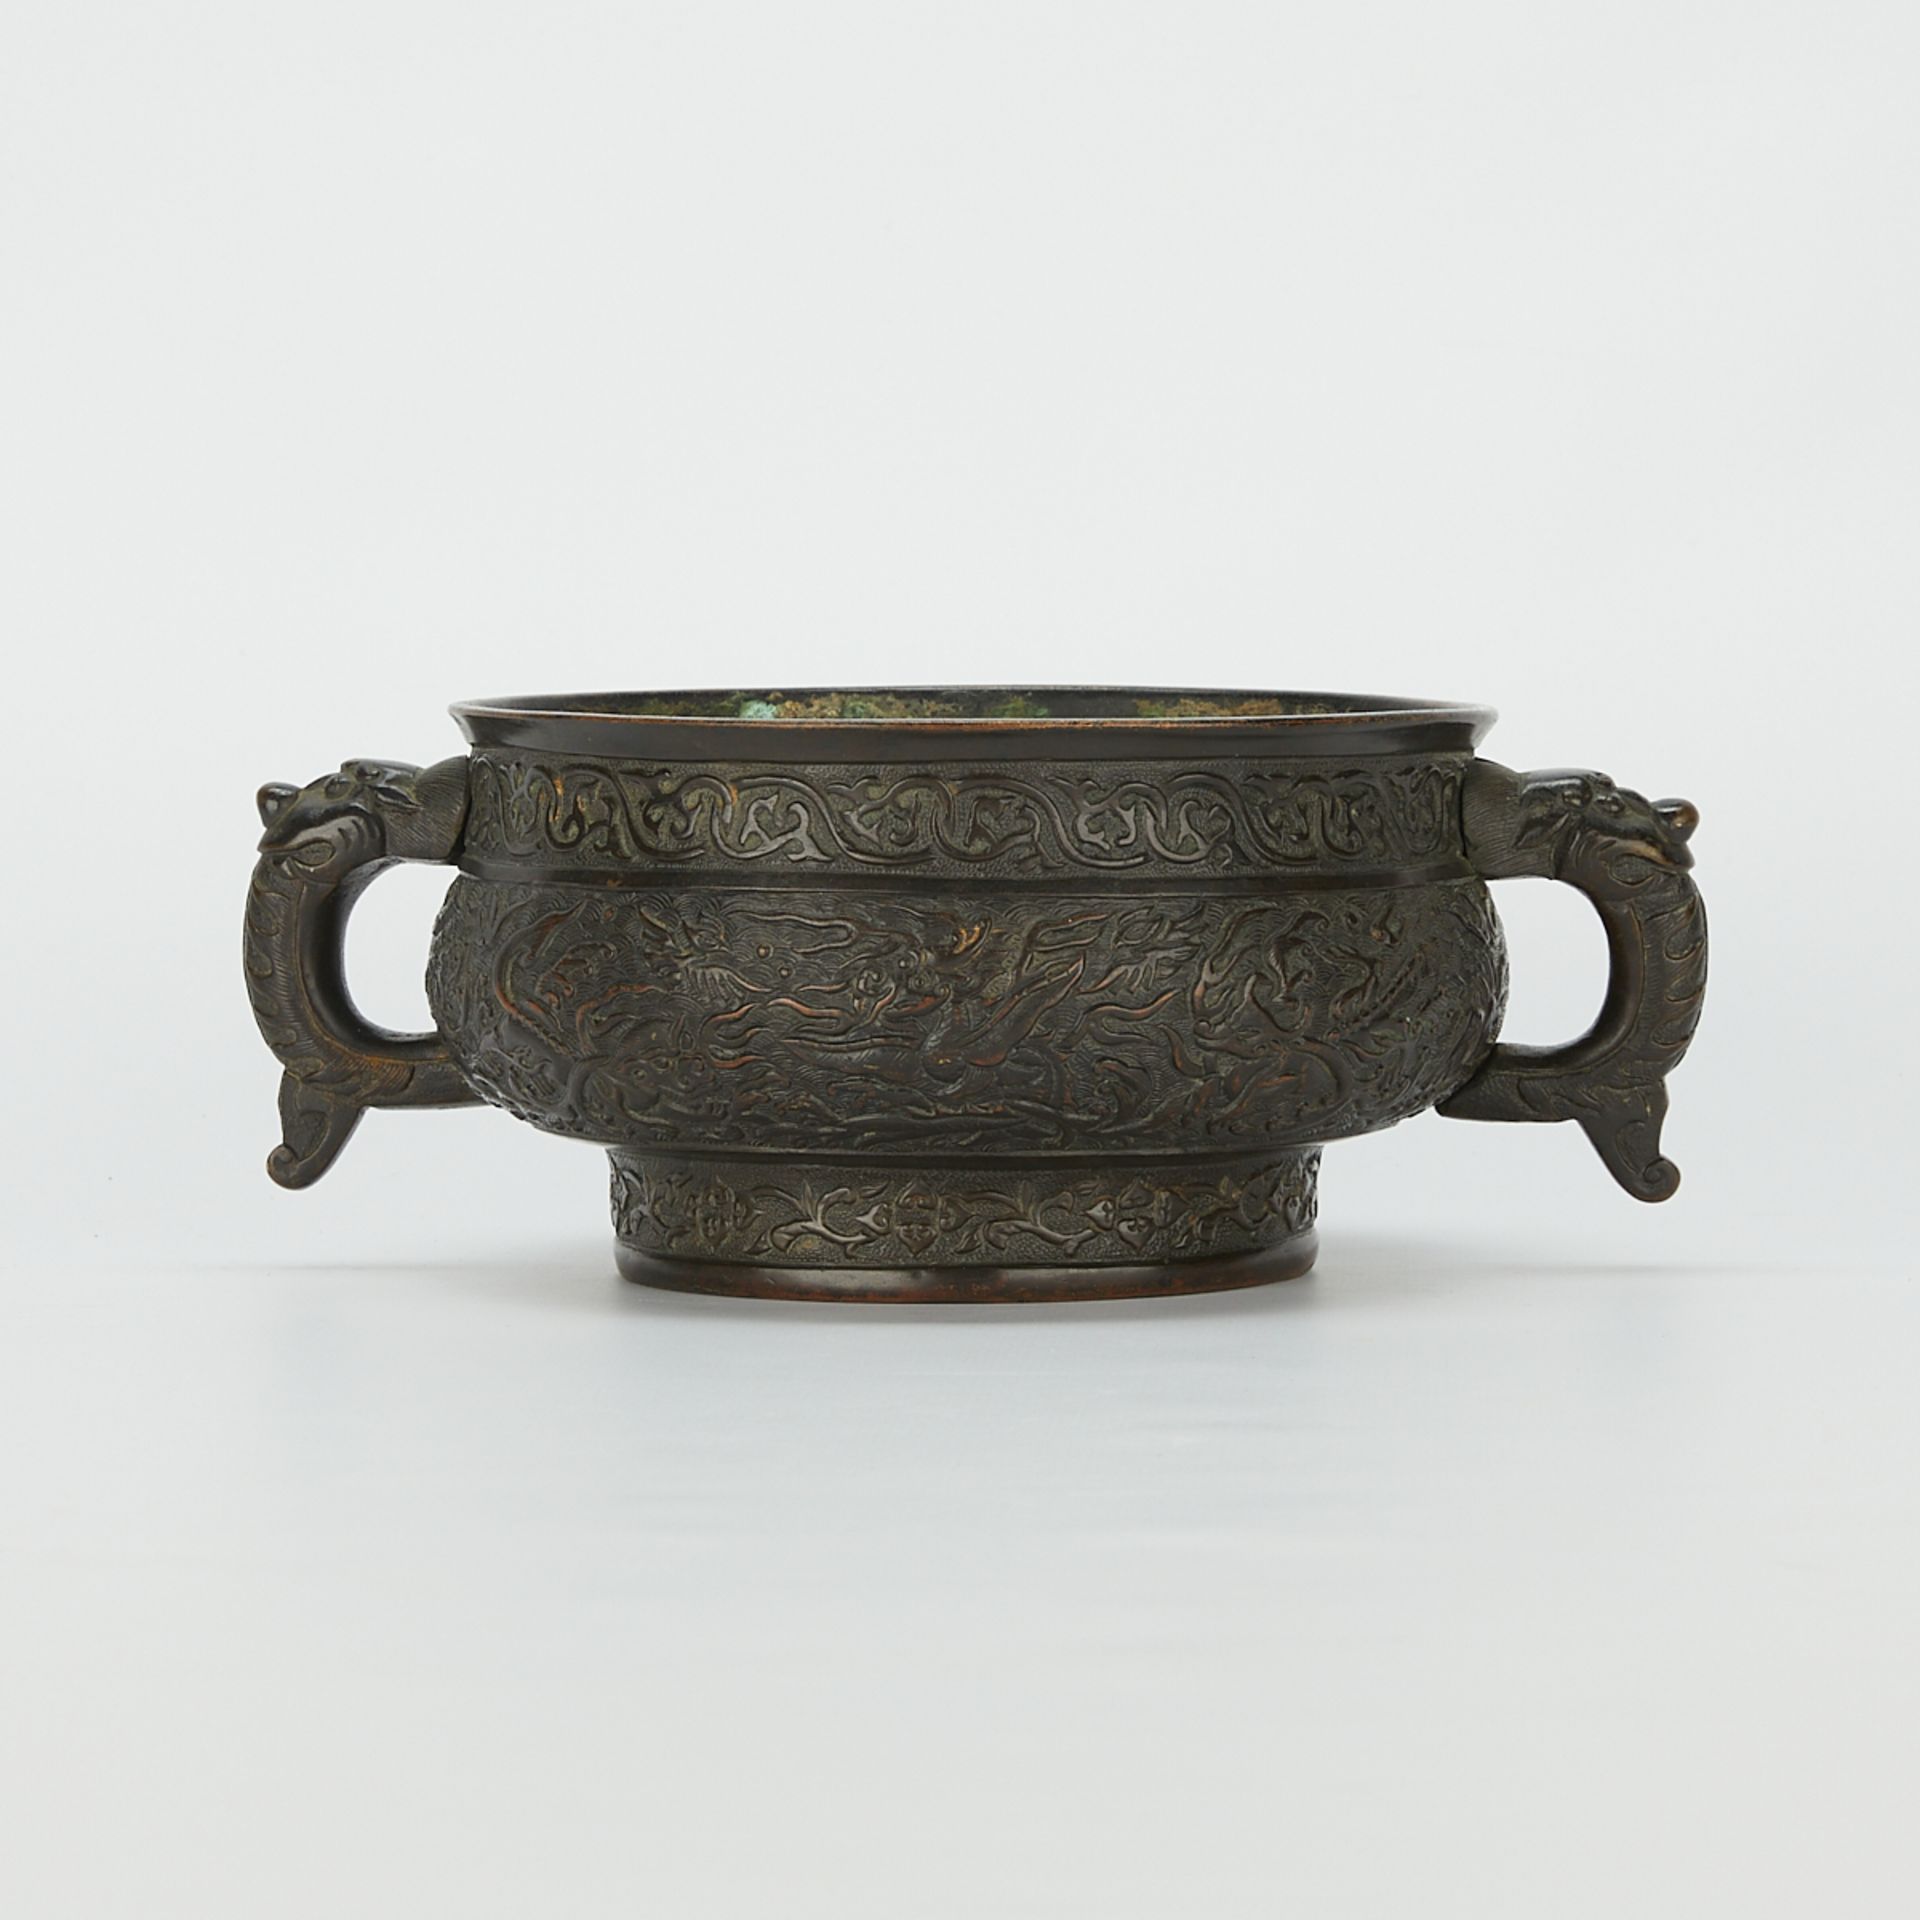 17th c. Chinese Bronze Mythical Beast Censer - Image 5 of 12